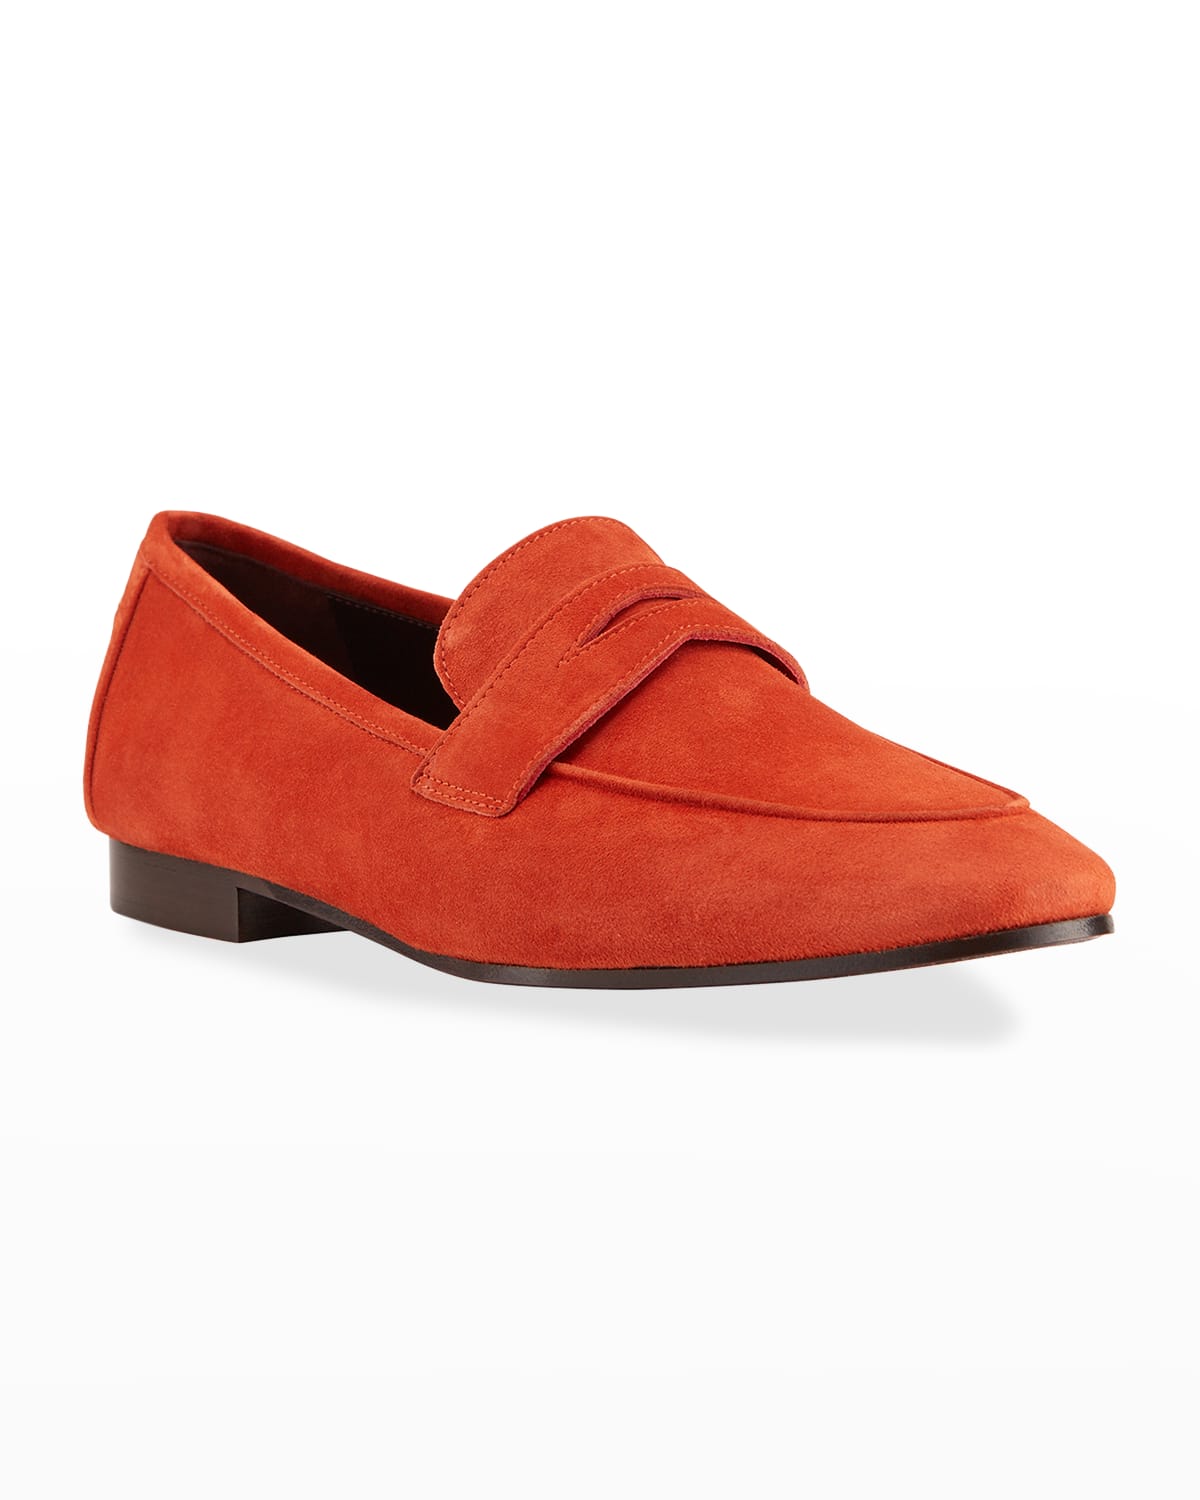 Bougeotte Penny Loafer Slip-On Mules | Neiman Marcus